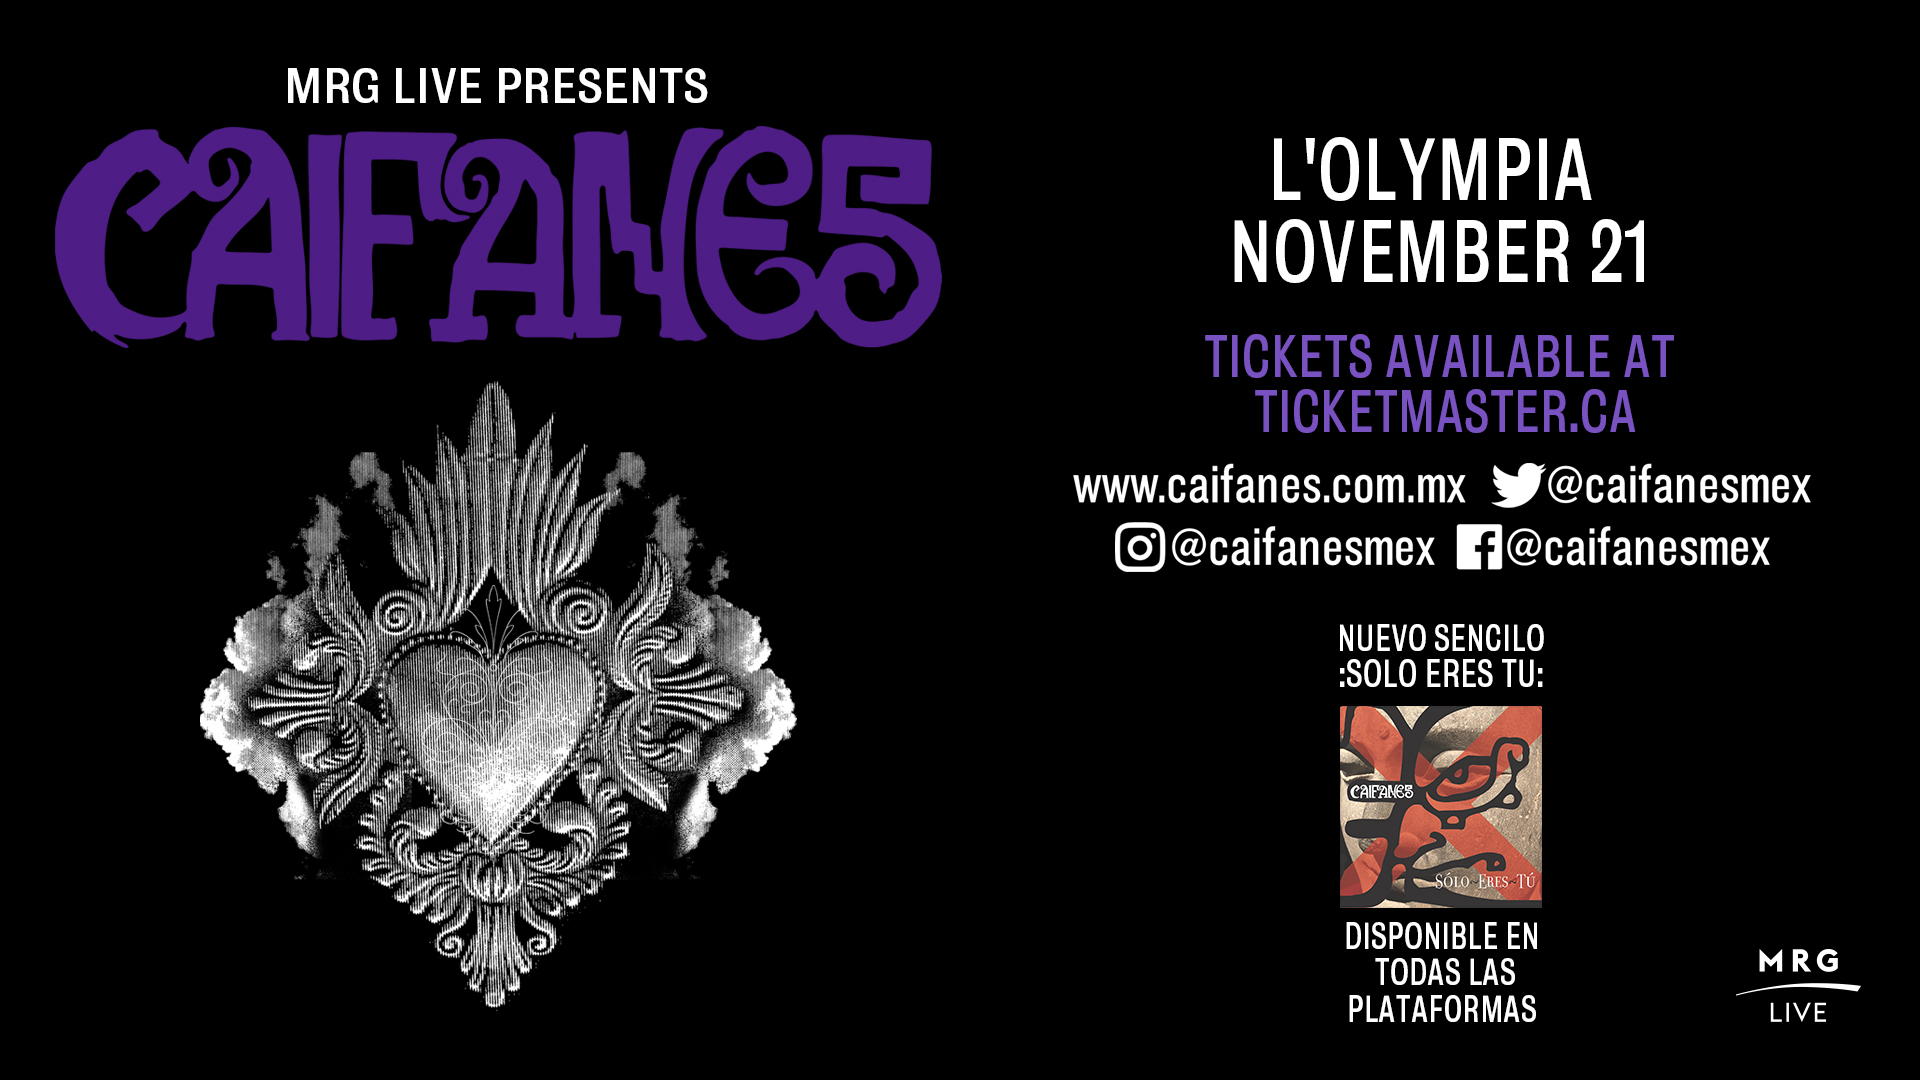 MRG Live presents An Evening With Caifanes